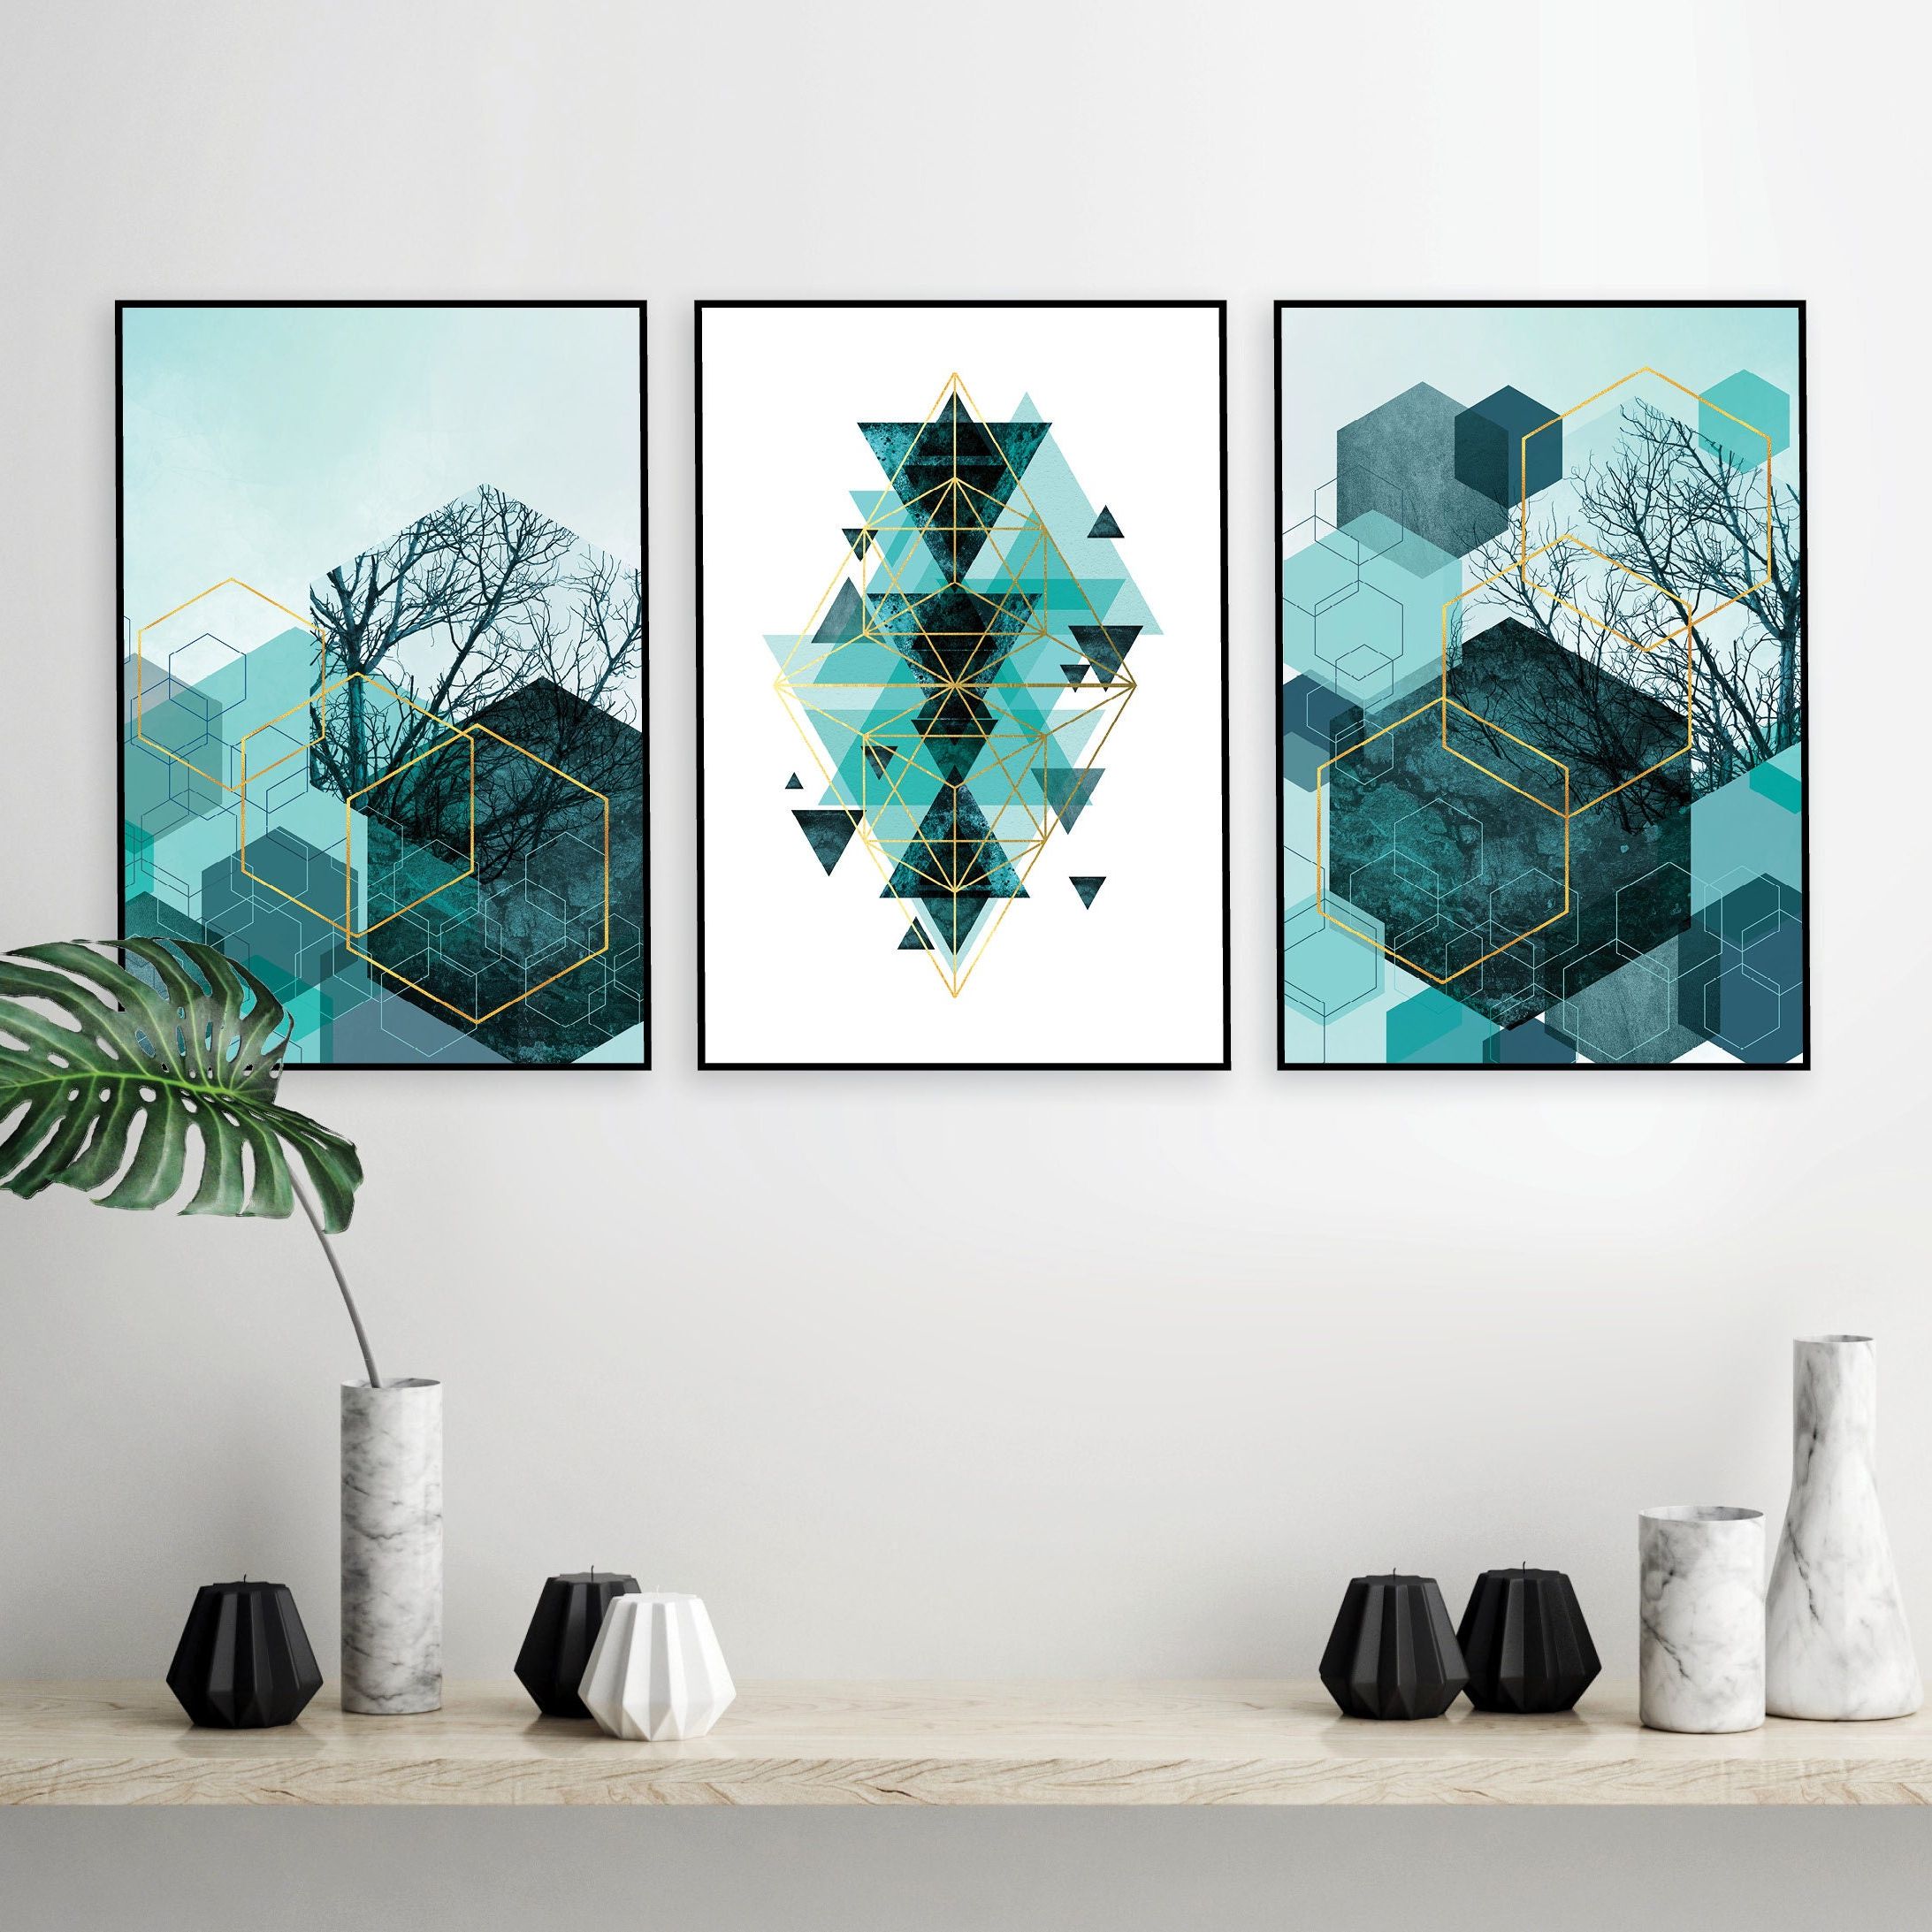 Latest Digital Download Set Of 3 Matching Prints Teal Turquoise – Etsy Intended For Teal Hexagons Wall Art (View 3 of 15)